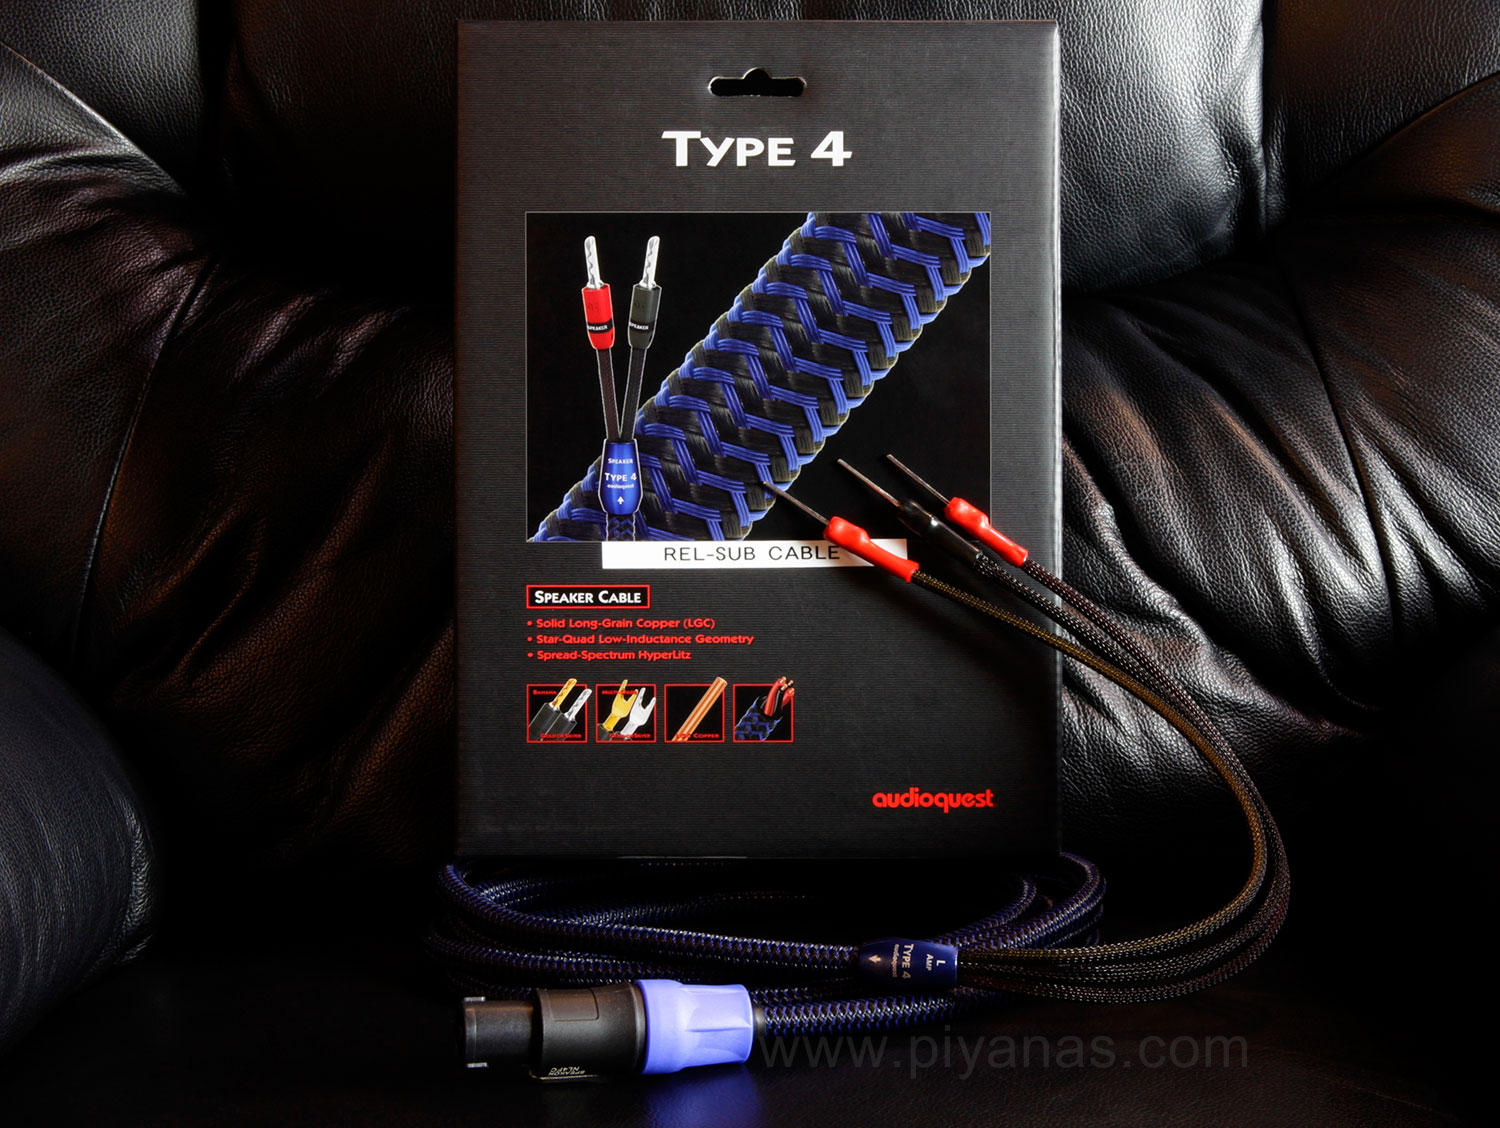 TYPE-4 (REL SUB CABLE) (6.0M)